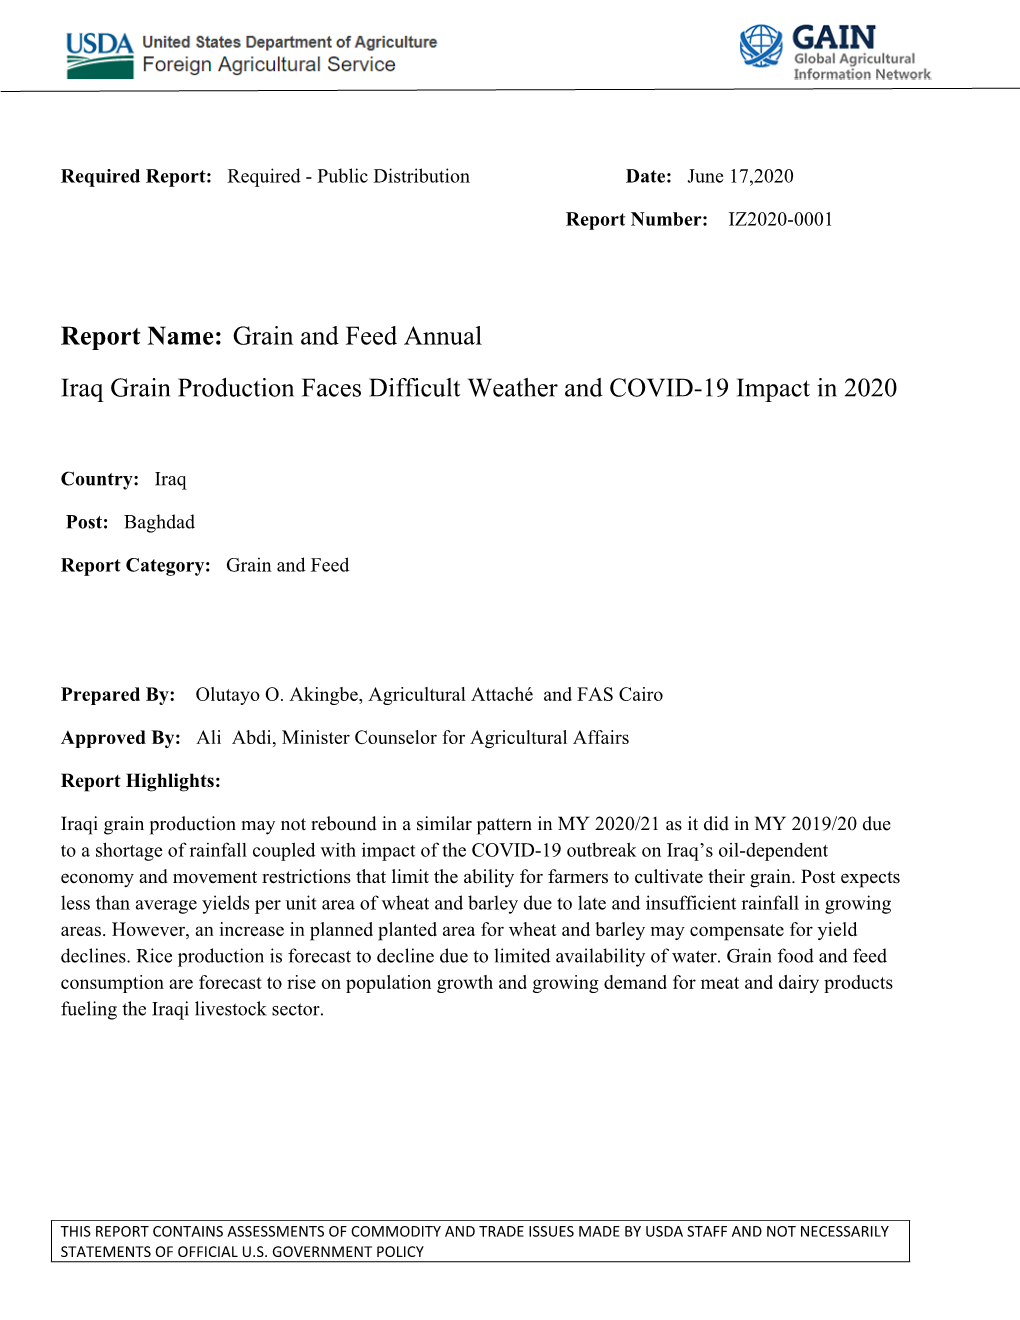 Report Name: Grain and Feed Annual Iraq Grain Production Faces Difficult Weather and COVID-19 Impact in 2020